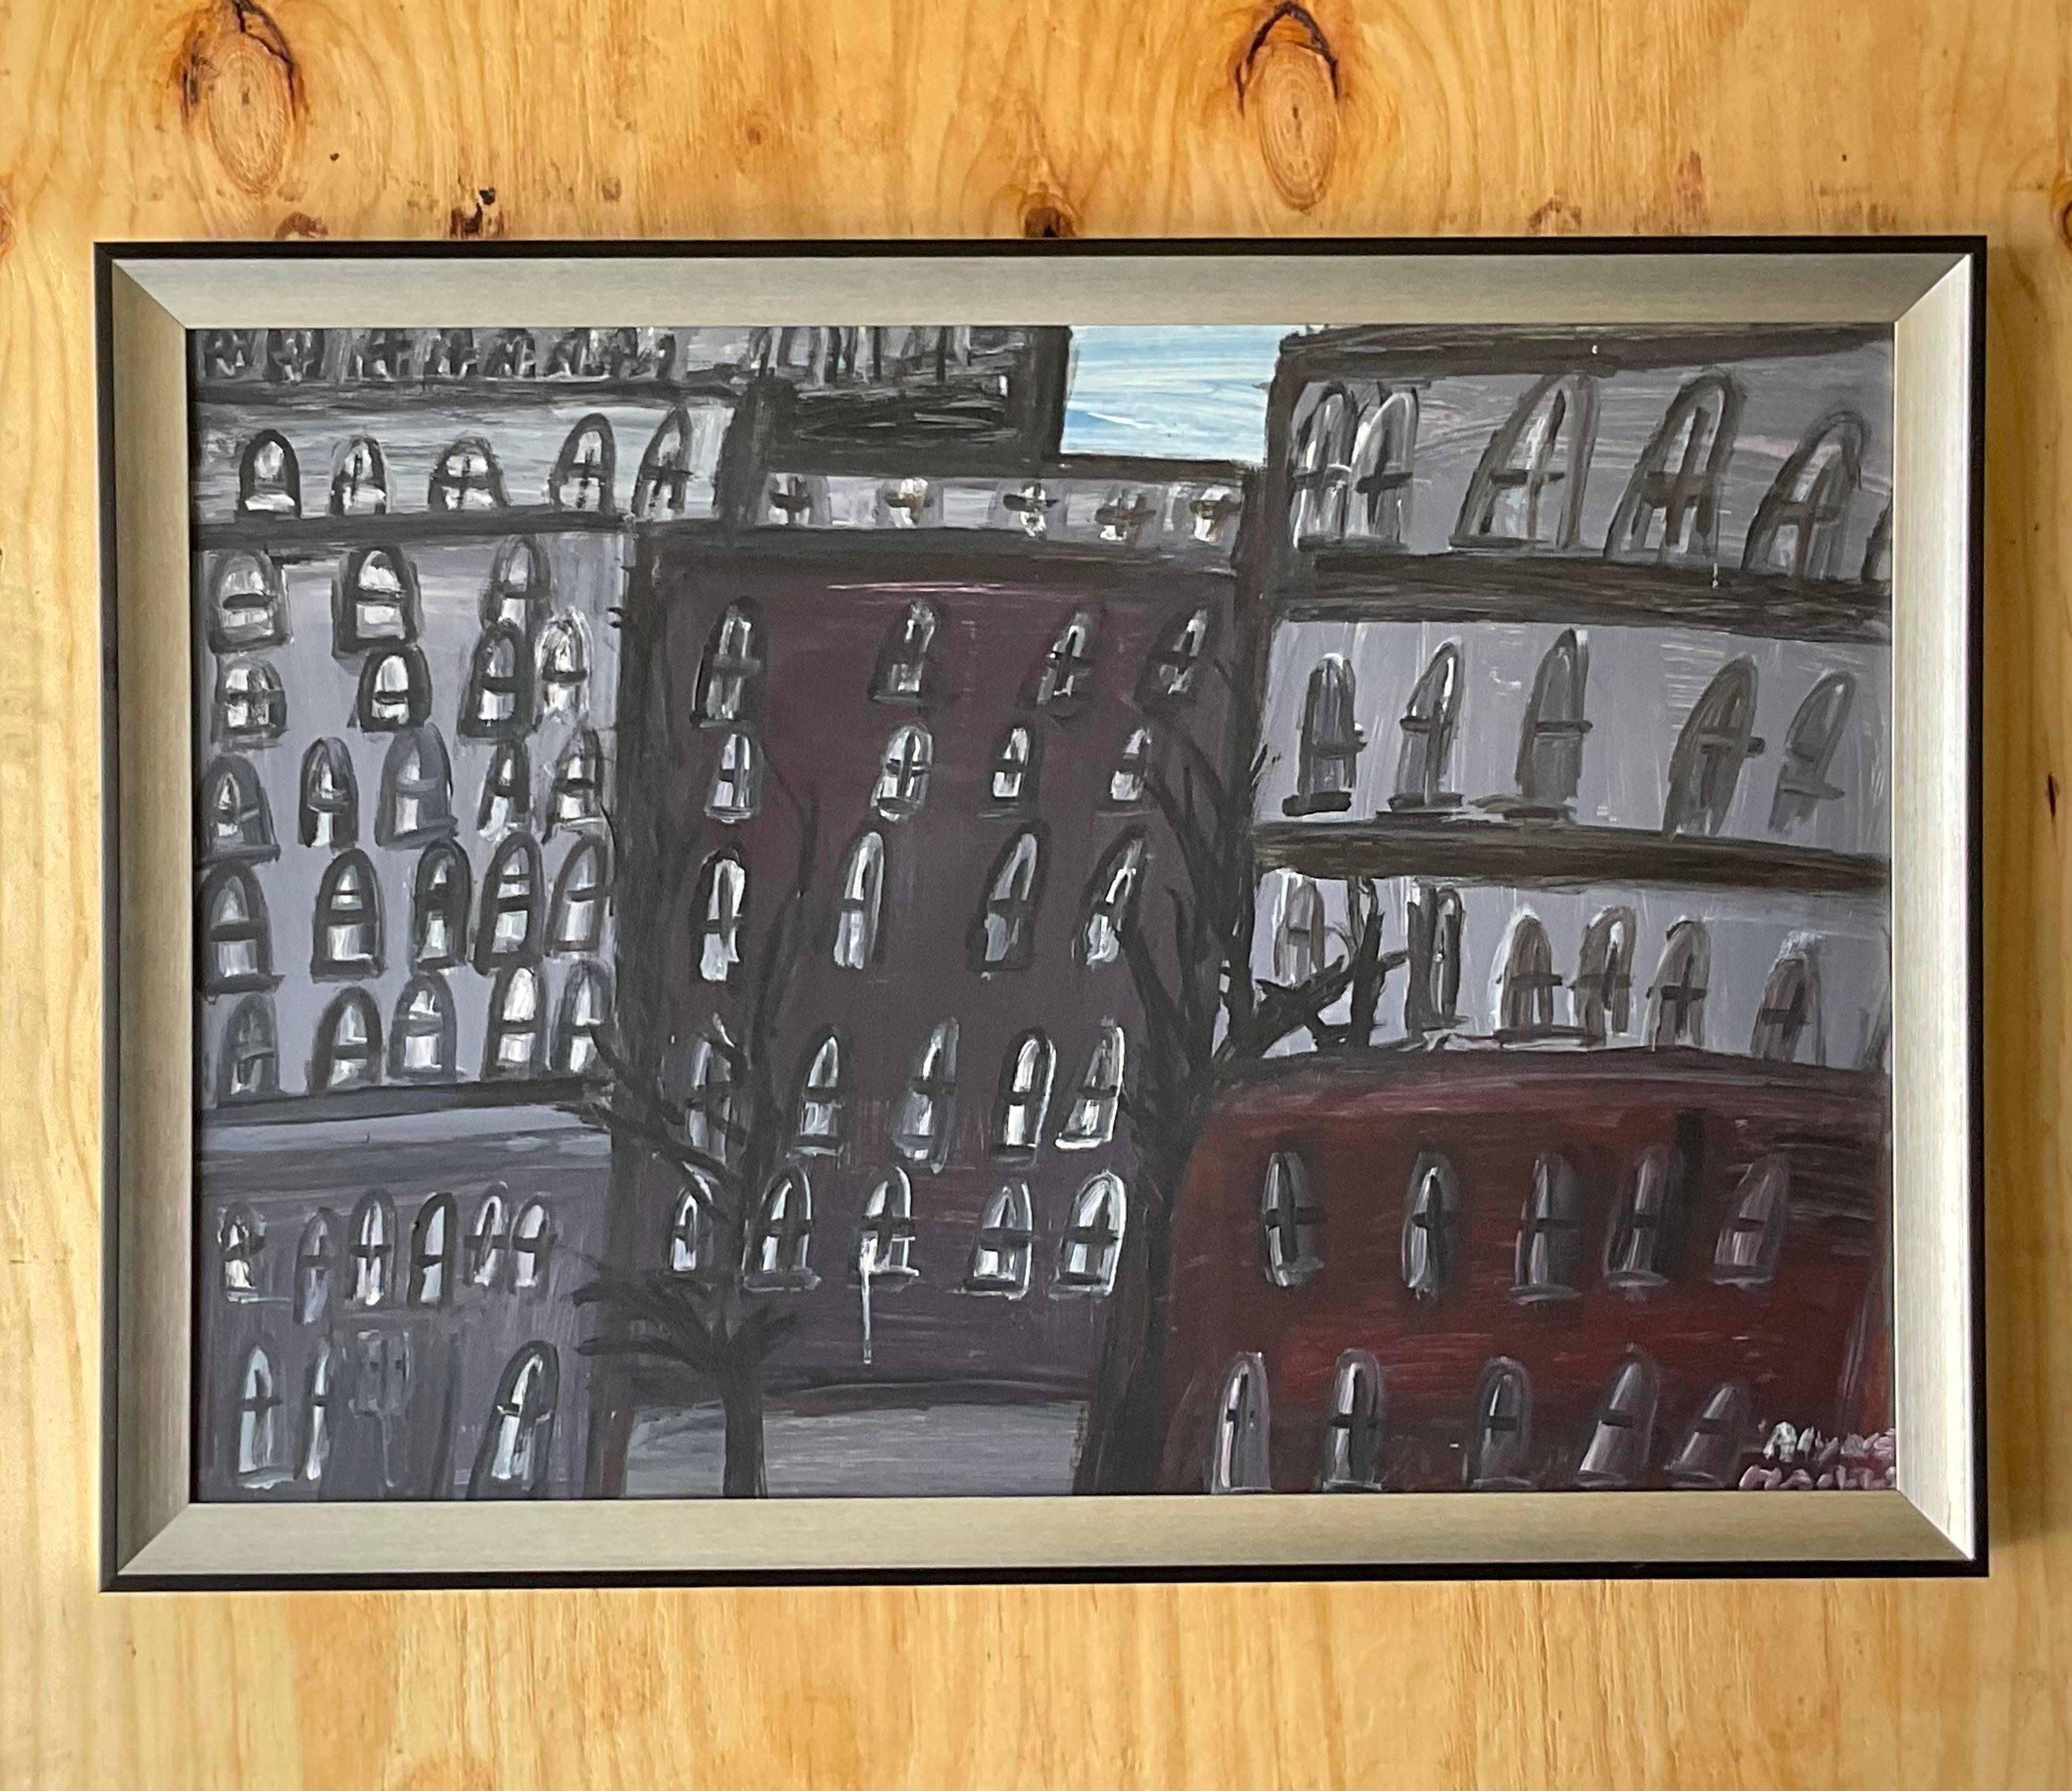 A fabulous vintage Boho original oil painting. A chic Abstract Expressionistic composition of a city block. Deep moody colors with a beautiful silver frame with black touches. Signed by the artist. Acquired from a Palm Beach estate.